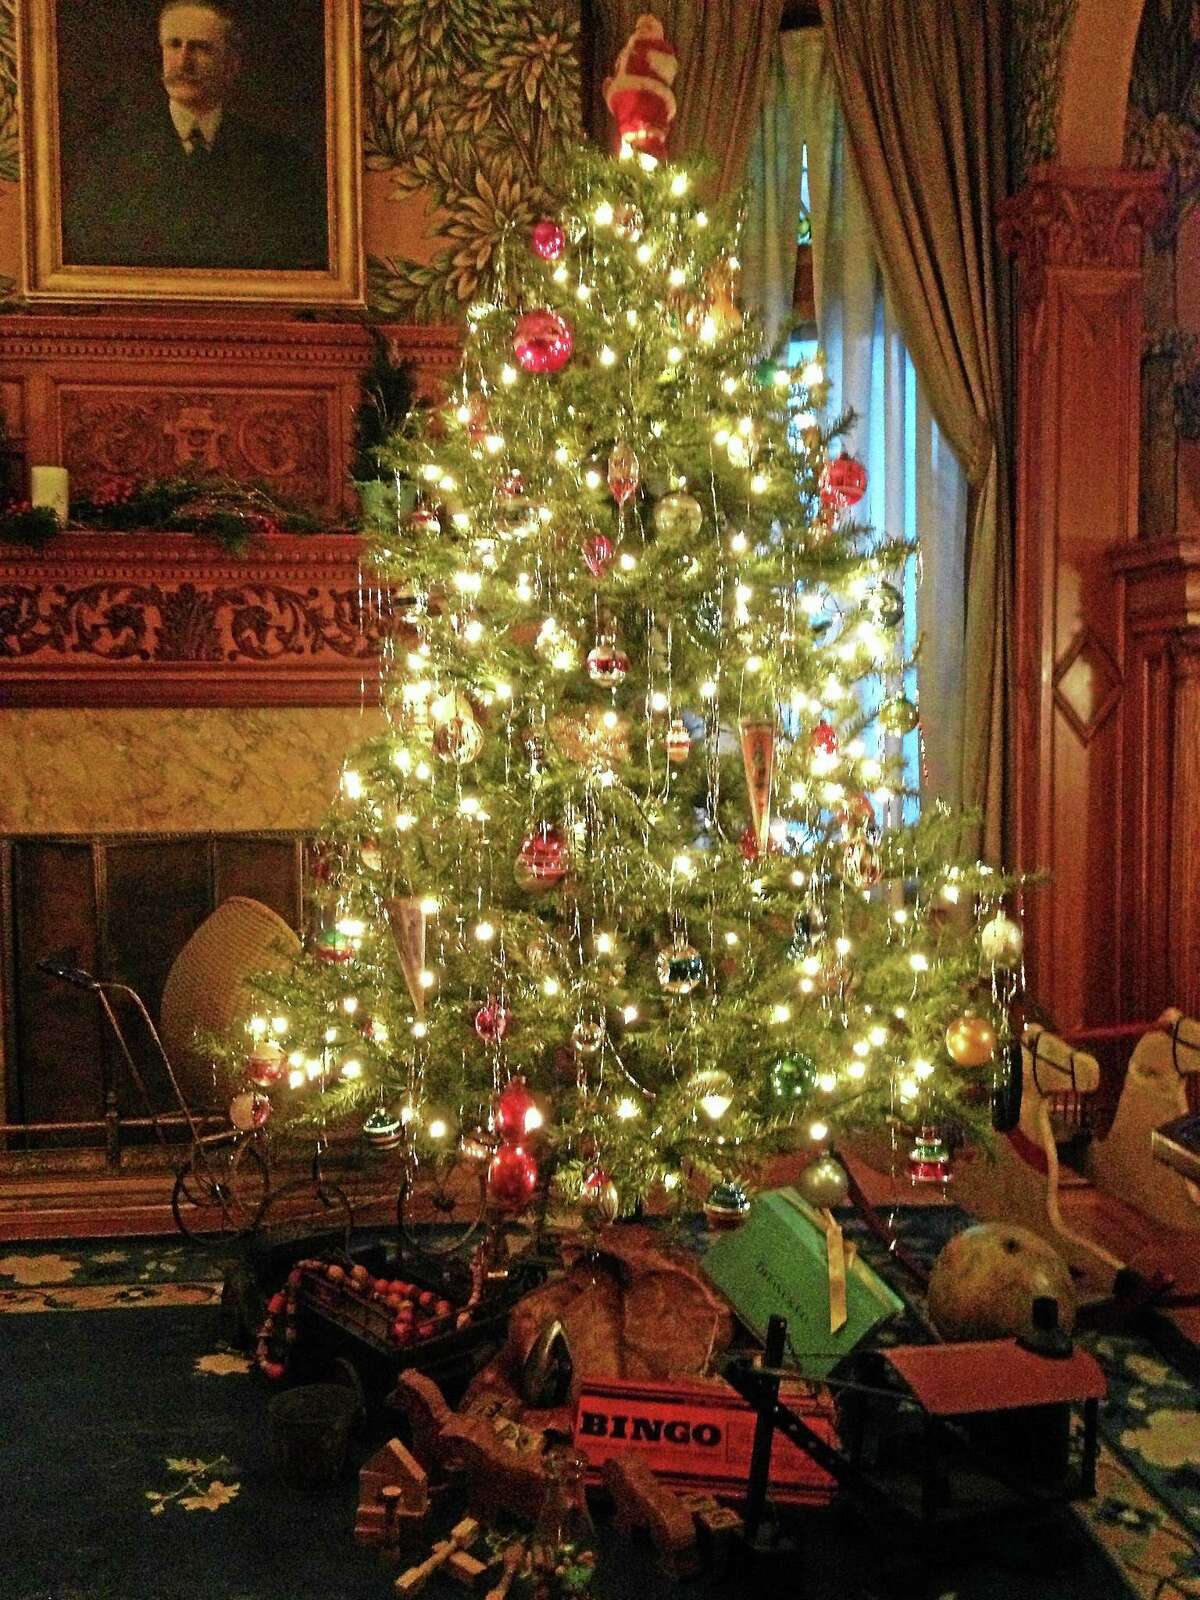 Photos courtesy of the Torrington Historical Society The Hotchkiss-Fyler House and Museum in Torrington is decorated for Christmas and open for tours on weekends through Dec. 28.